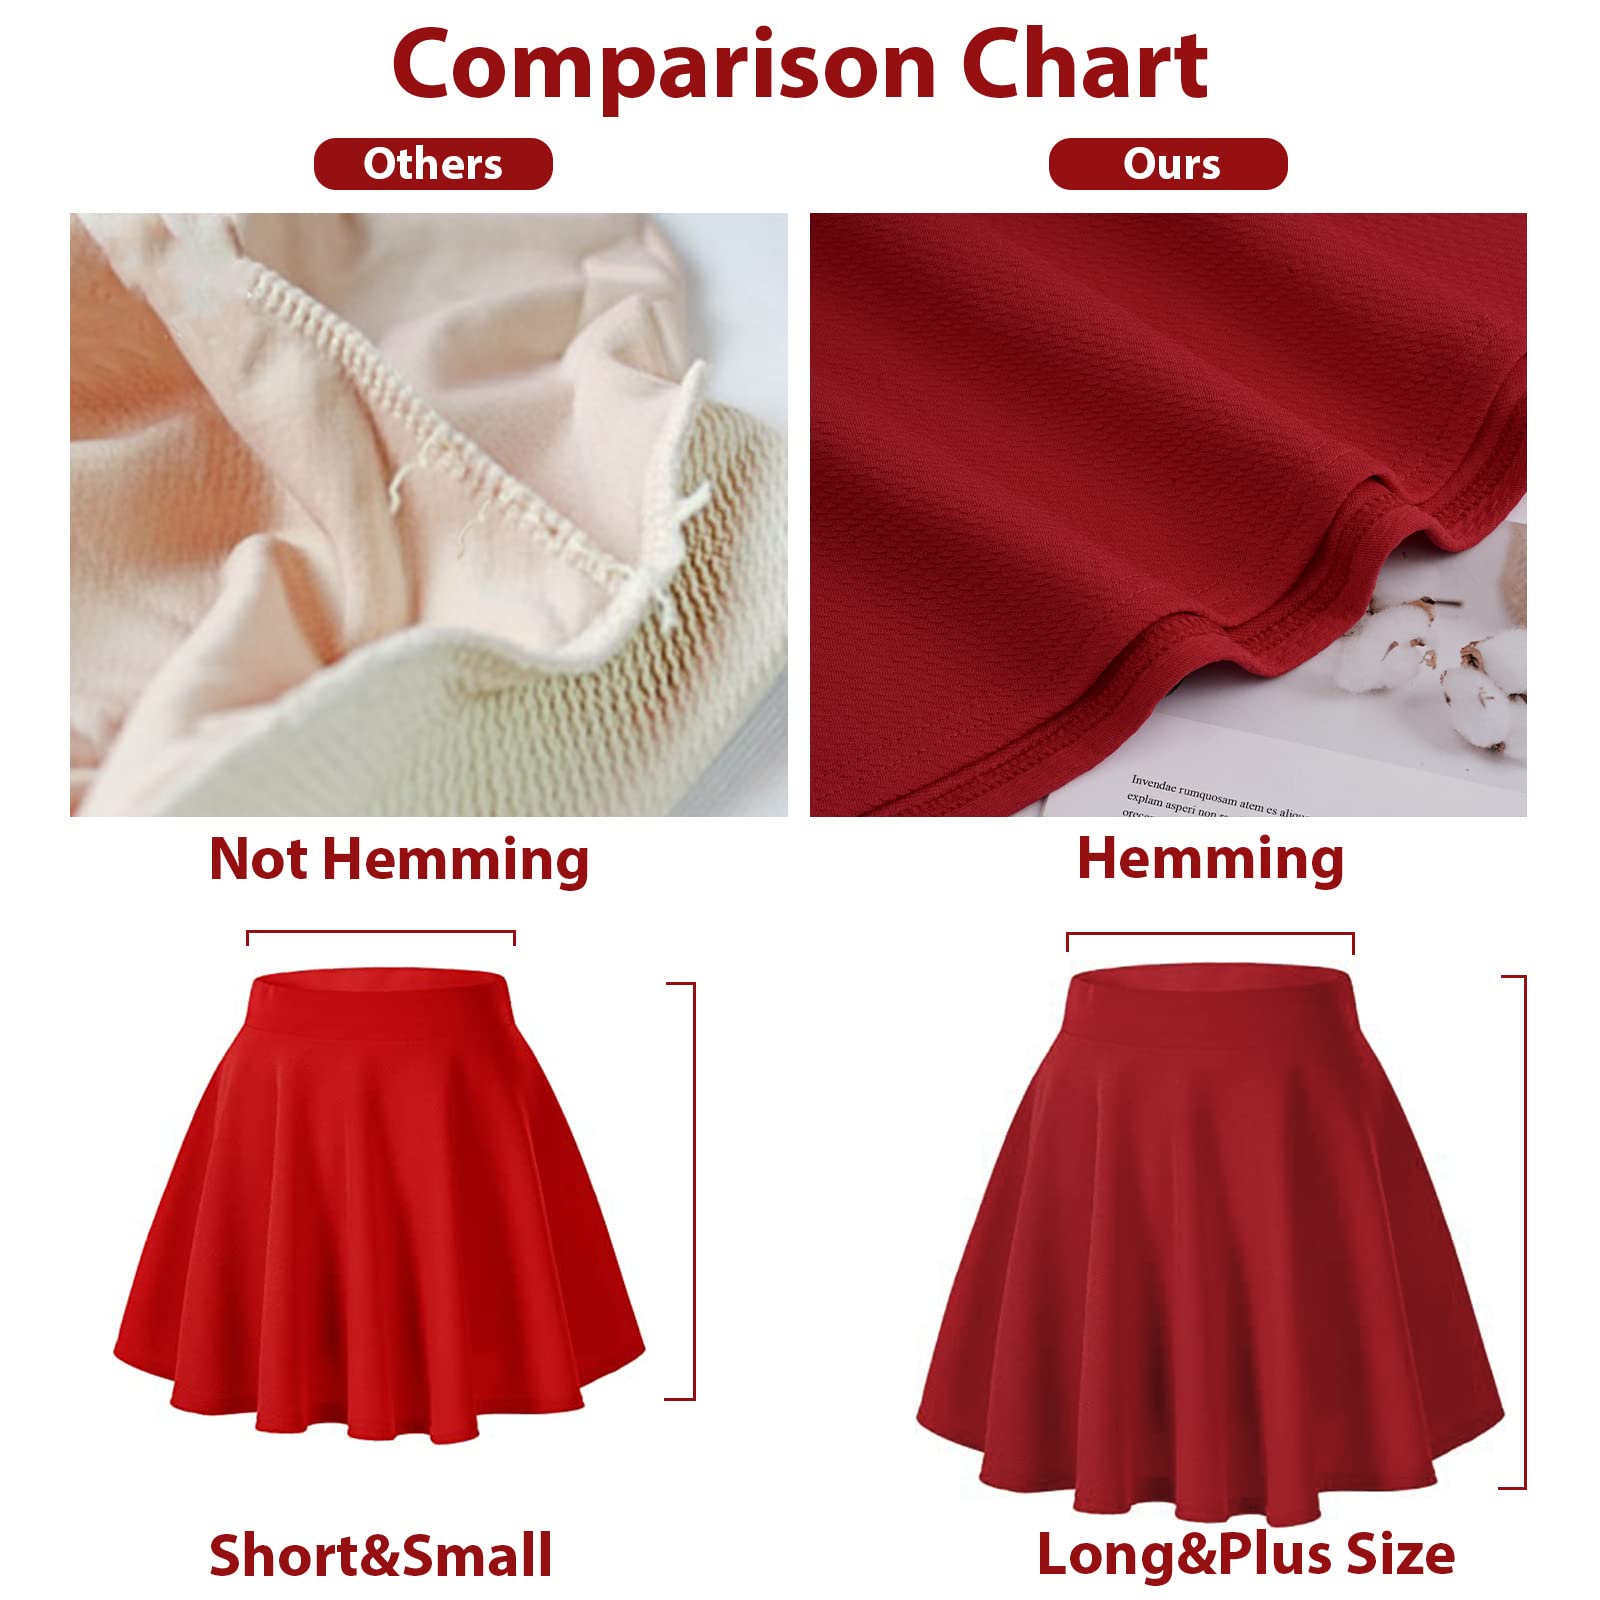 High Waisted Skater Skirt Plus Size-Red - Moon Wood